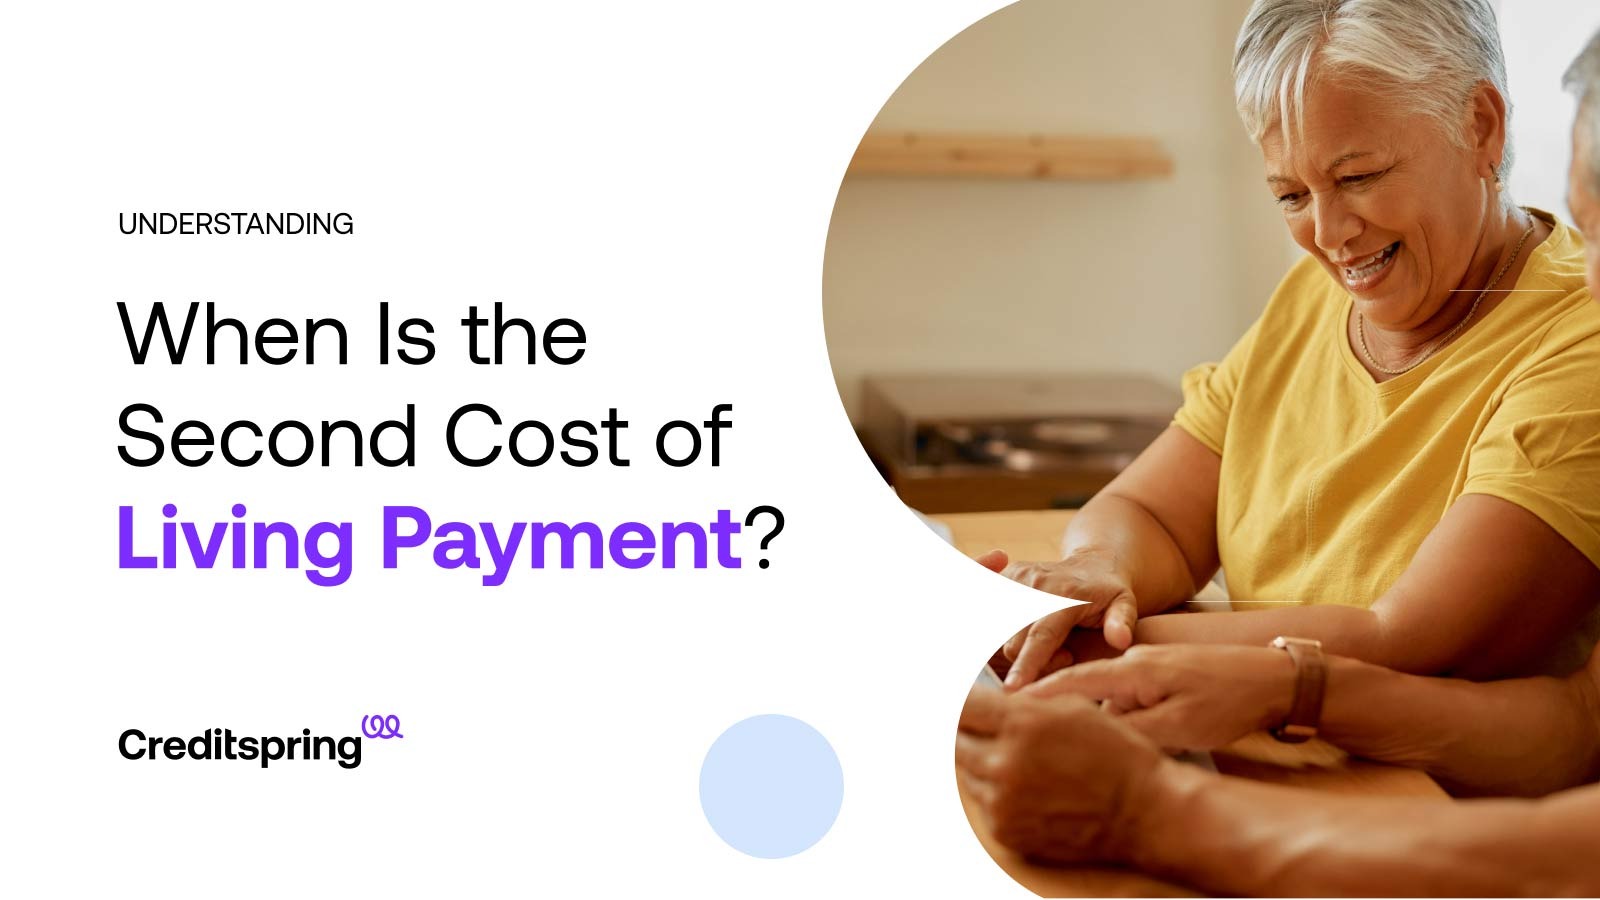 when is the second cost of living payment?